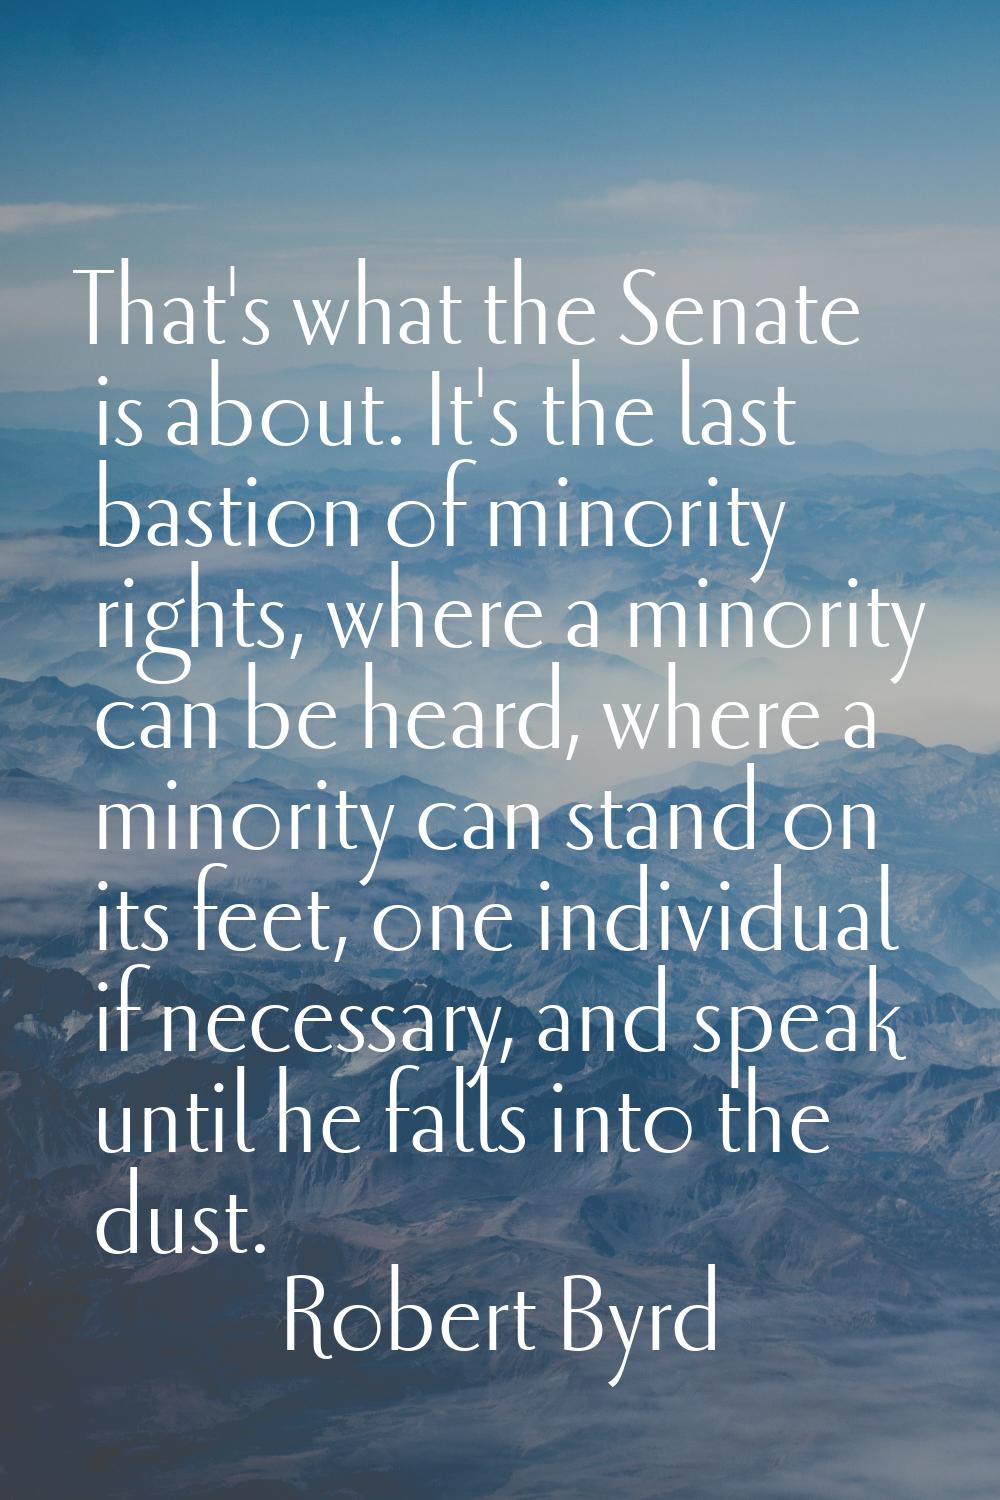 That's what the Senate is about. It's the last bastion of minority rights, where a minority can be 